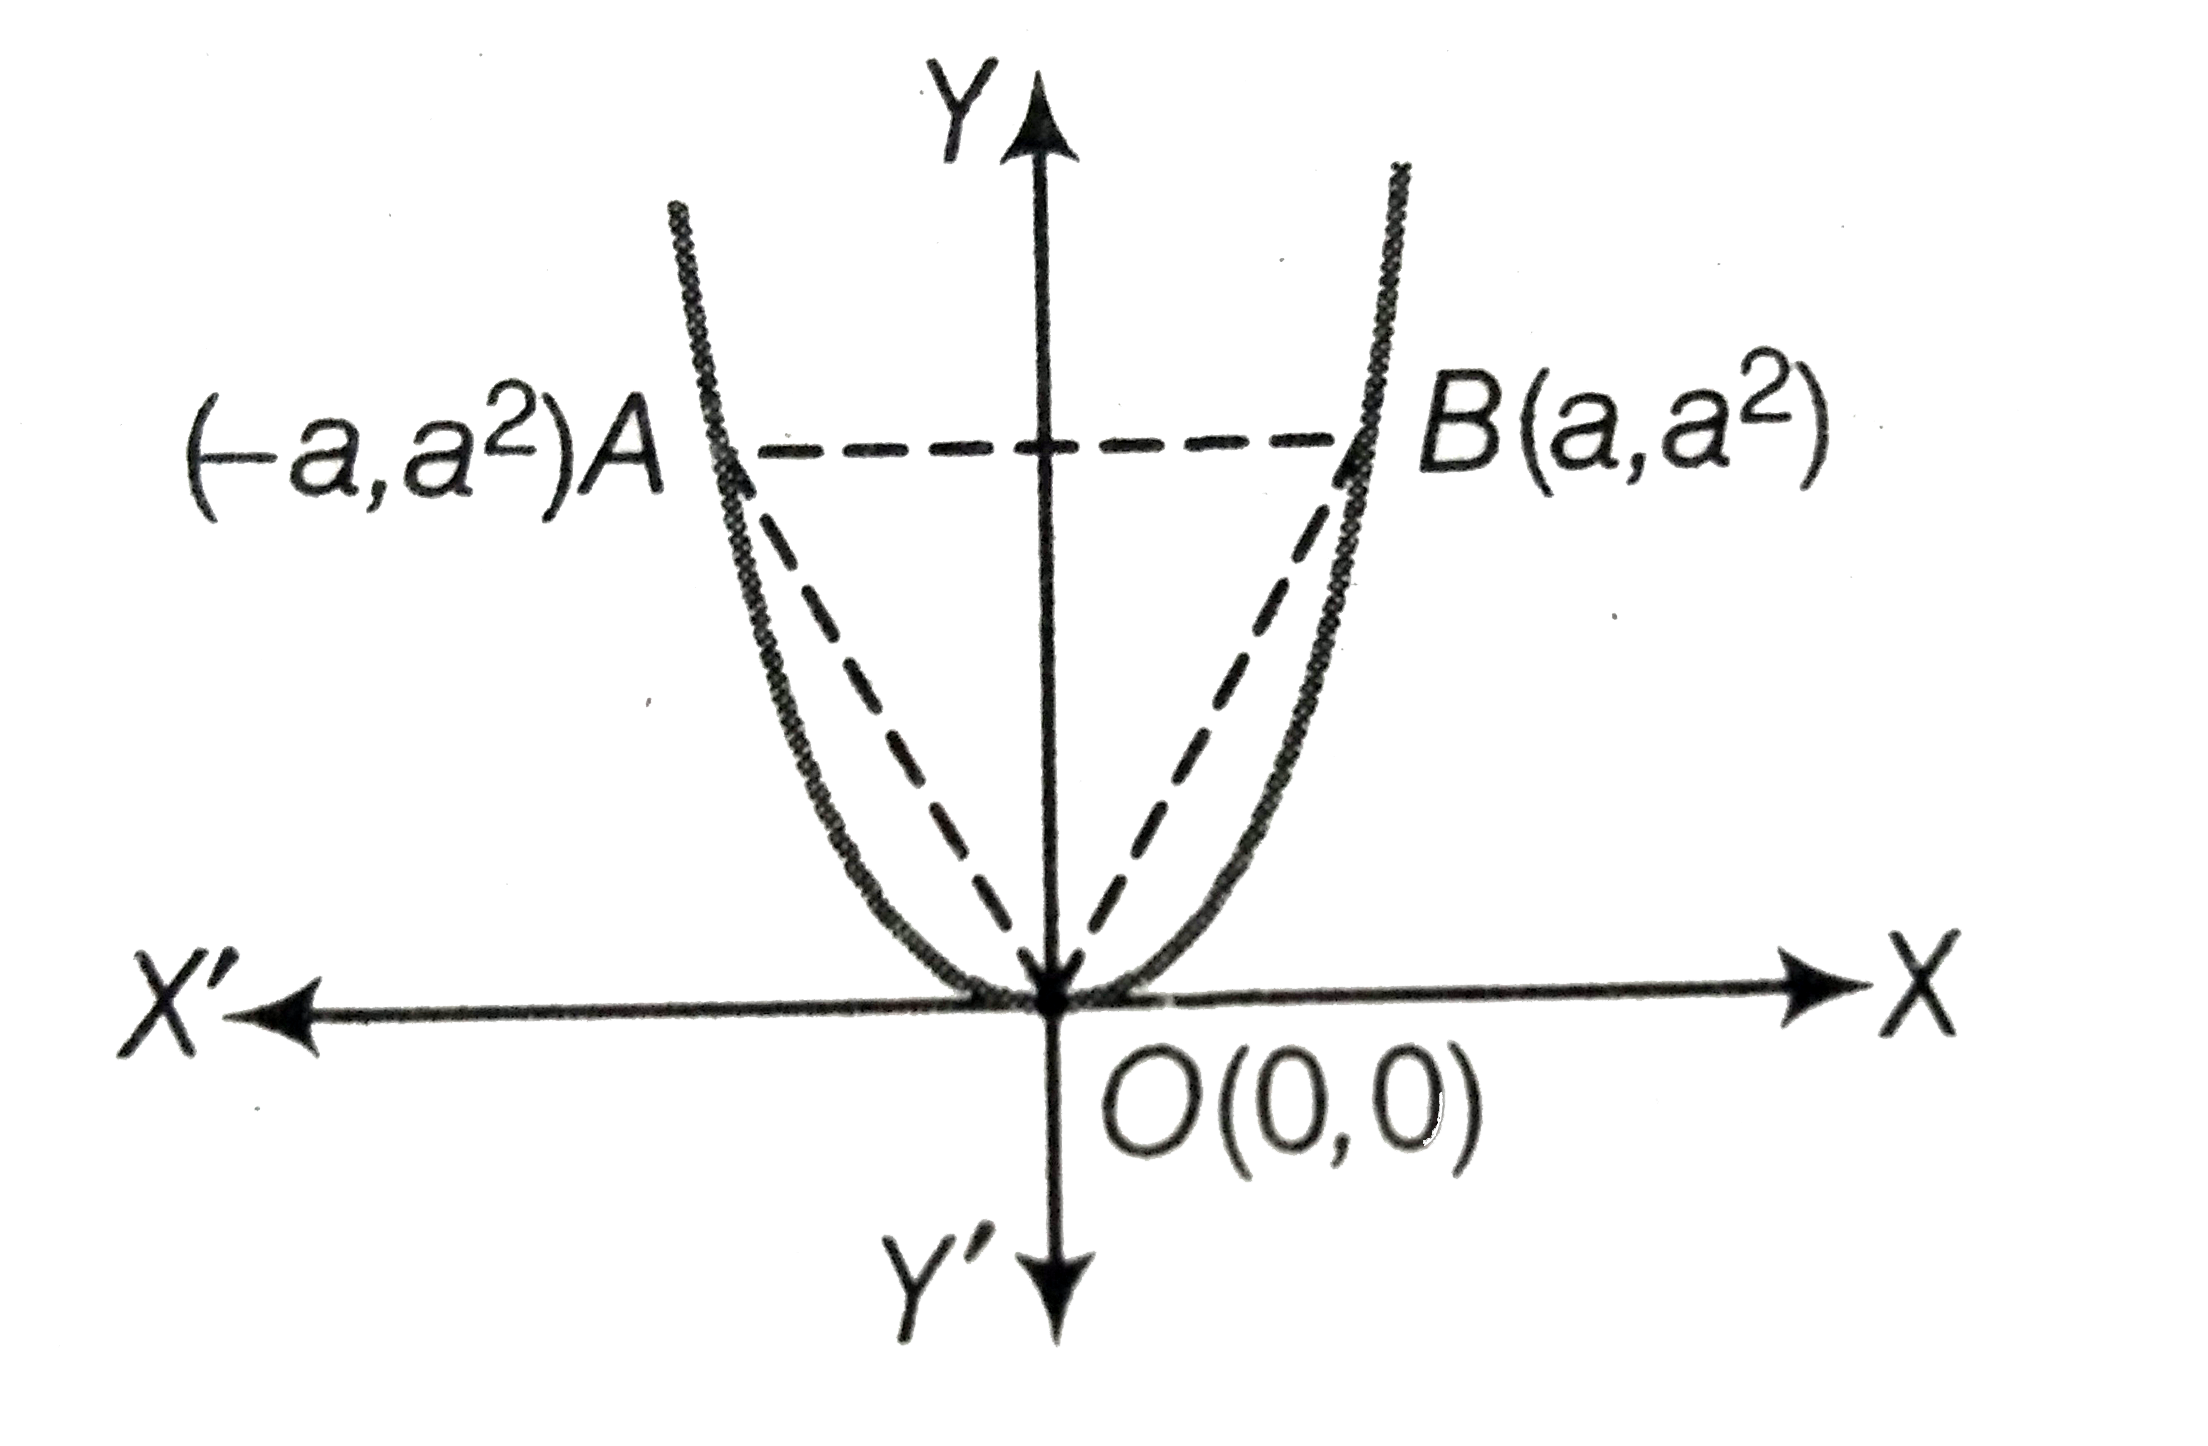 The figure shows a DeltaAOB and the parabola y = x^(2). The ratio of the area of the DeltaAOB to the area of the region AOB of the parabola y = x^(2) is equal to